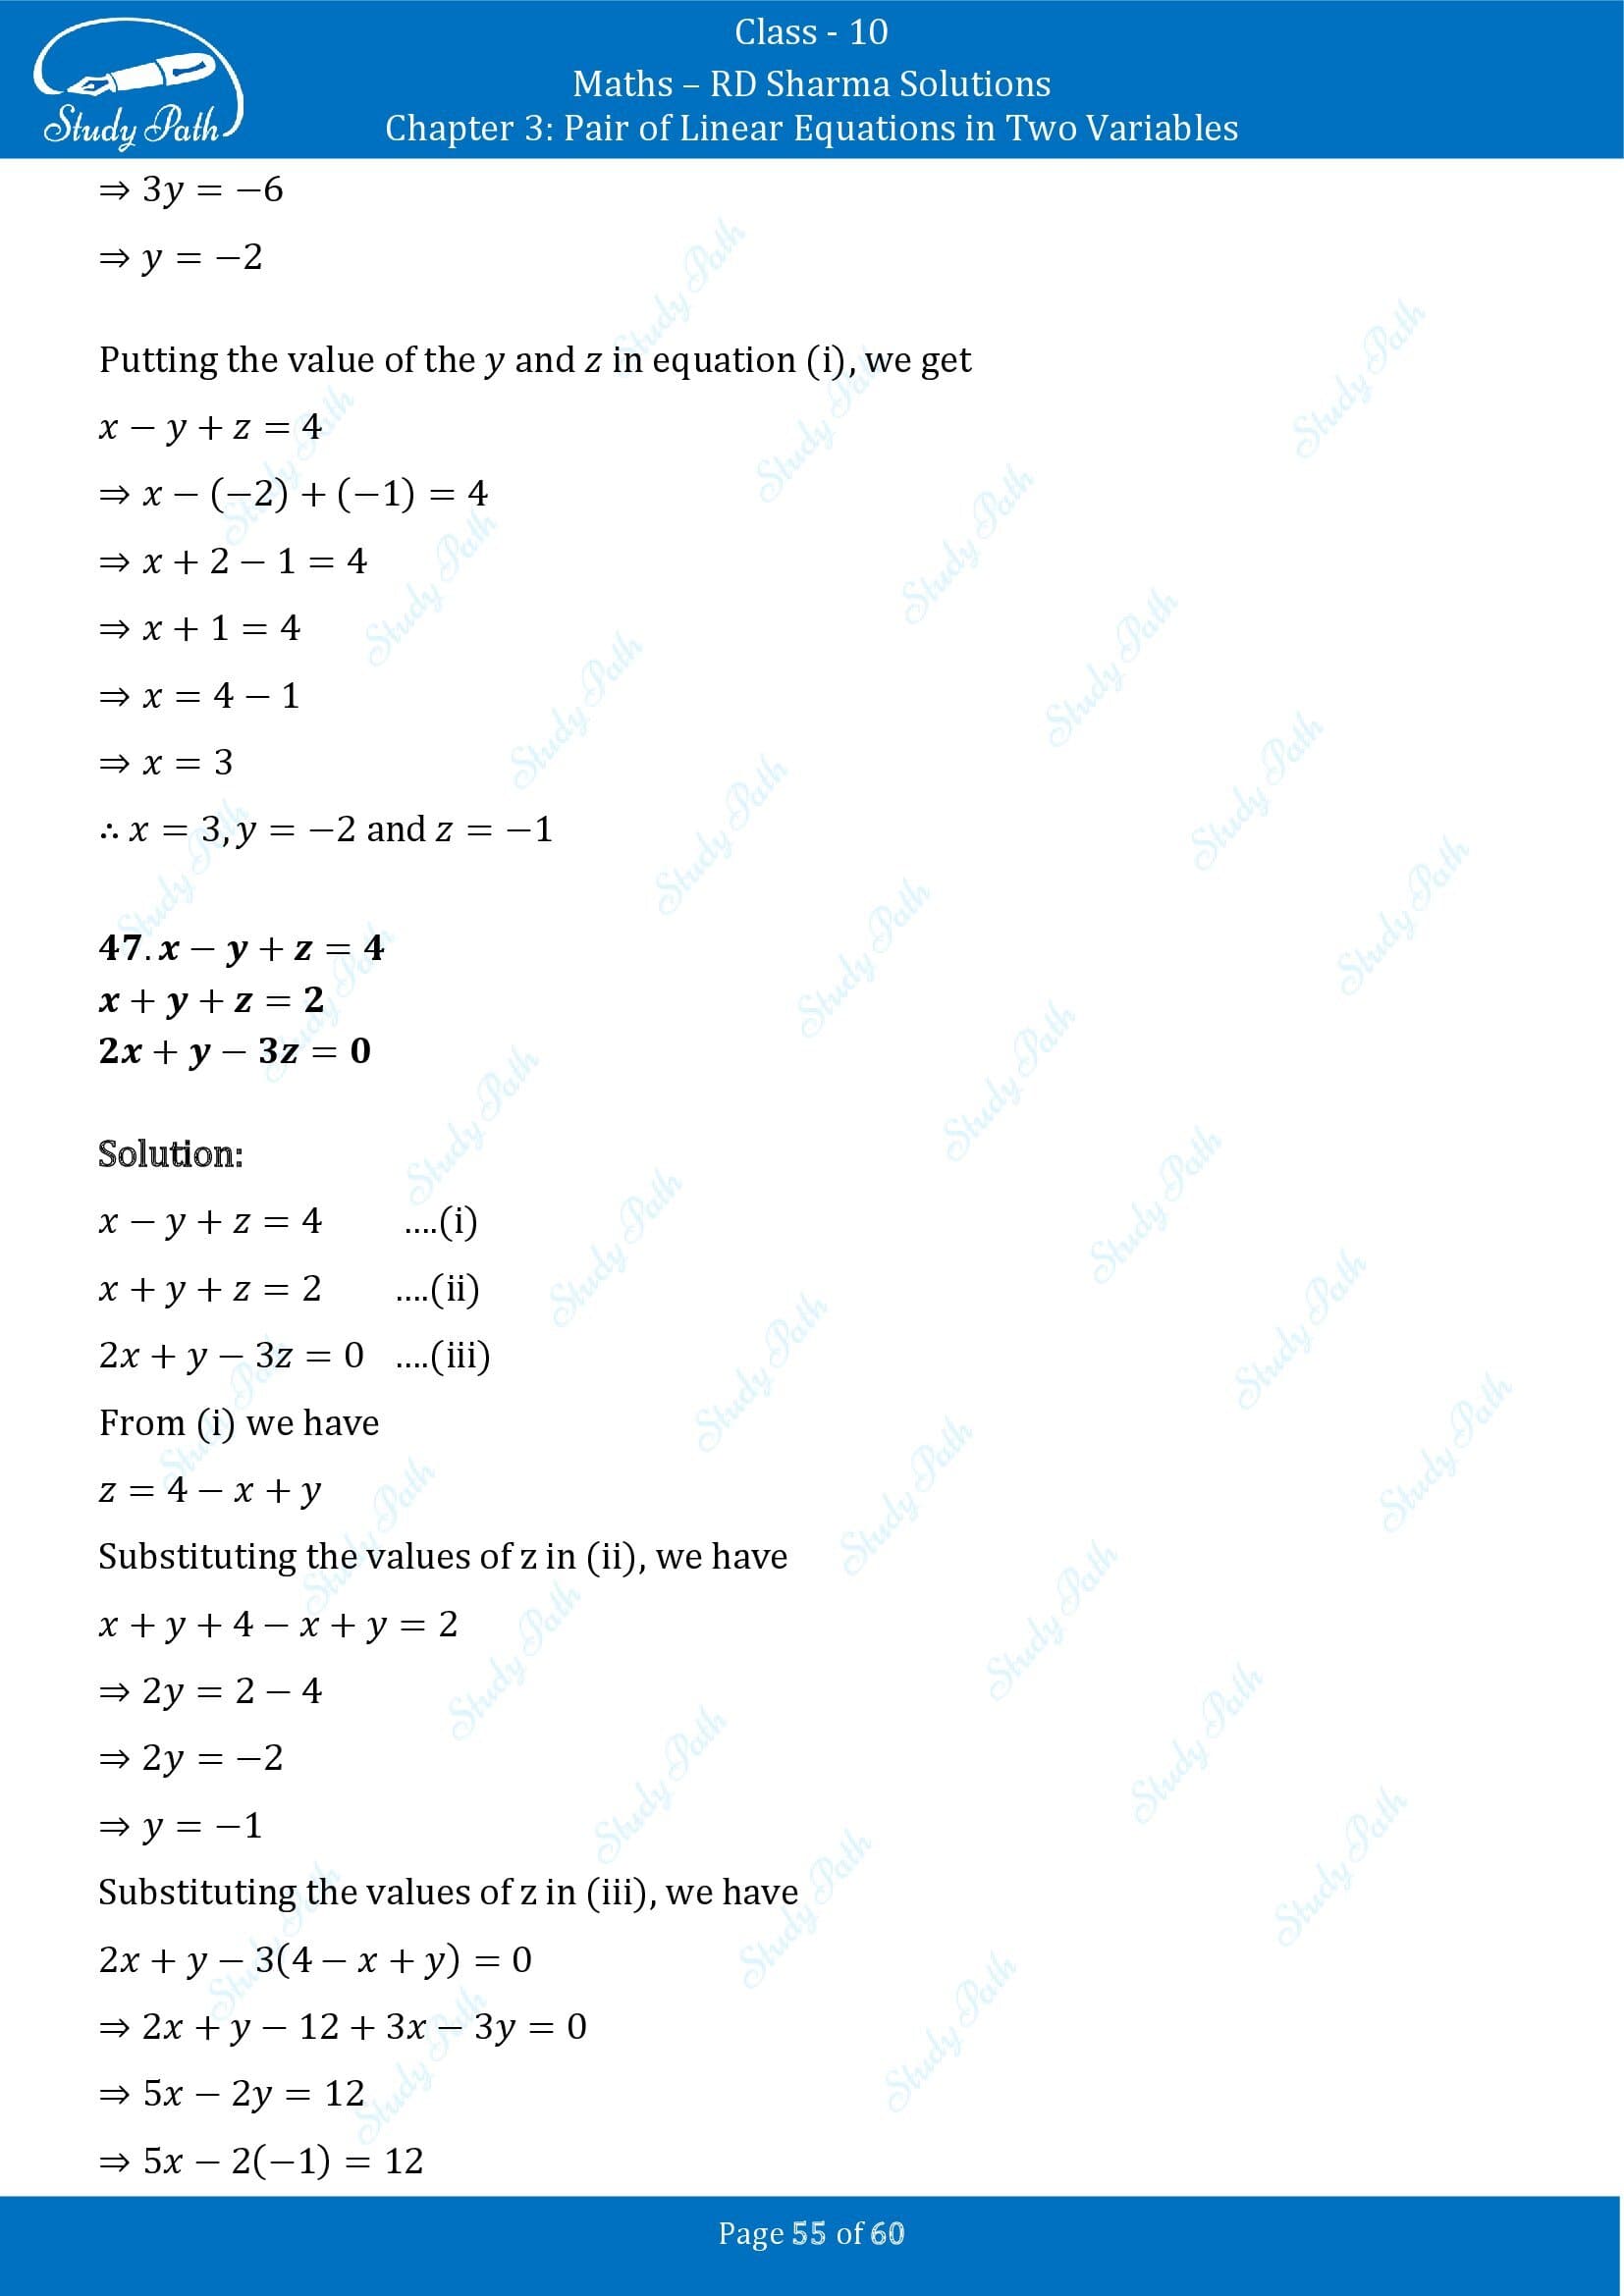 RD Sharma Solutions Class 10 Chapter 3 Pair of Linear Equations in Two Variables Exercise 3.3 00055